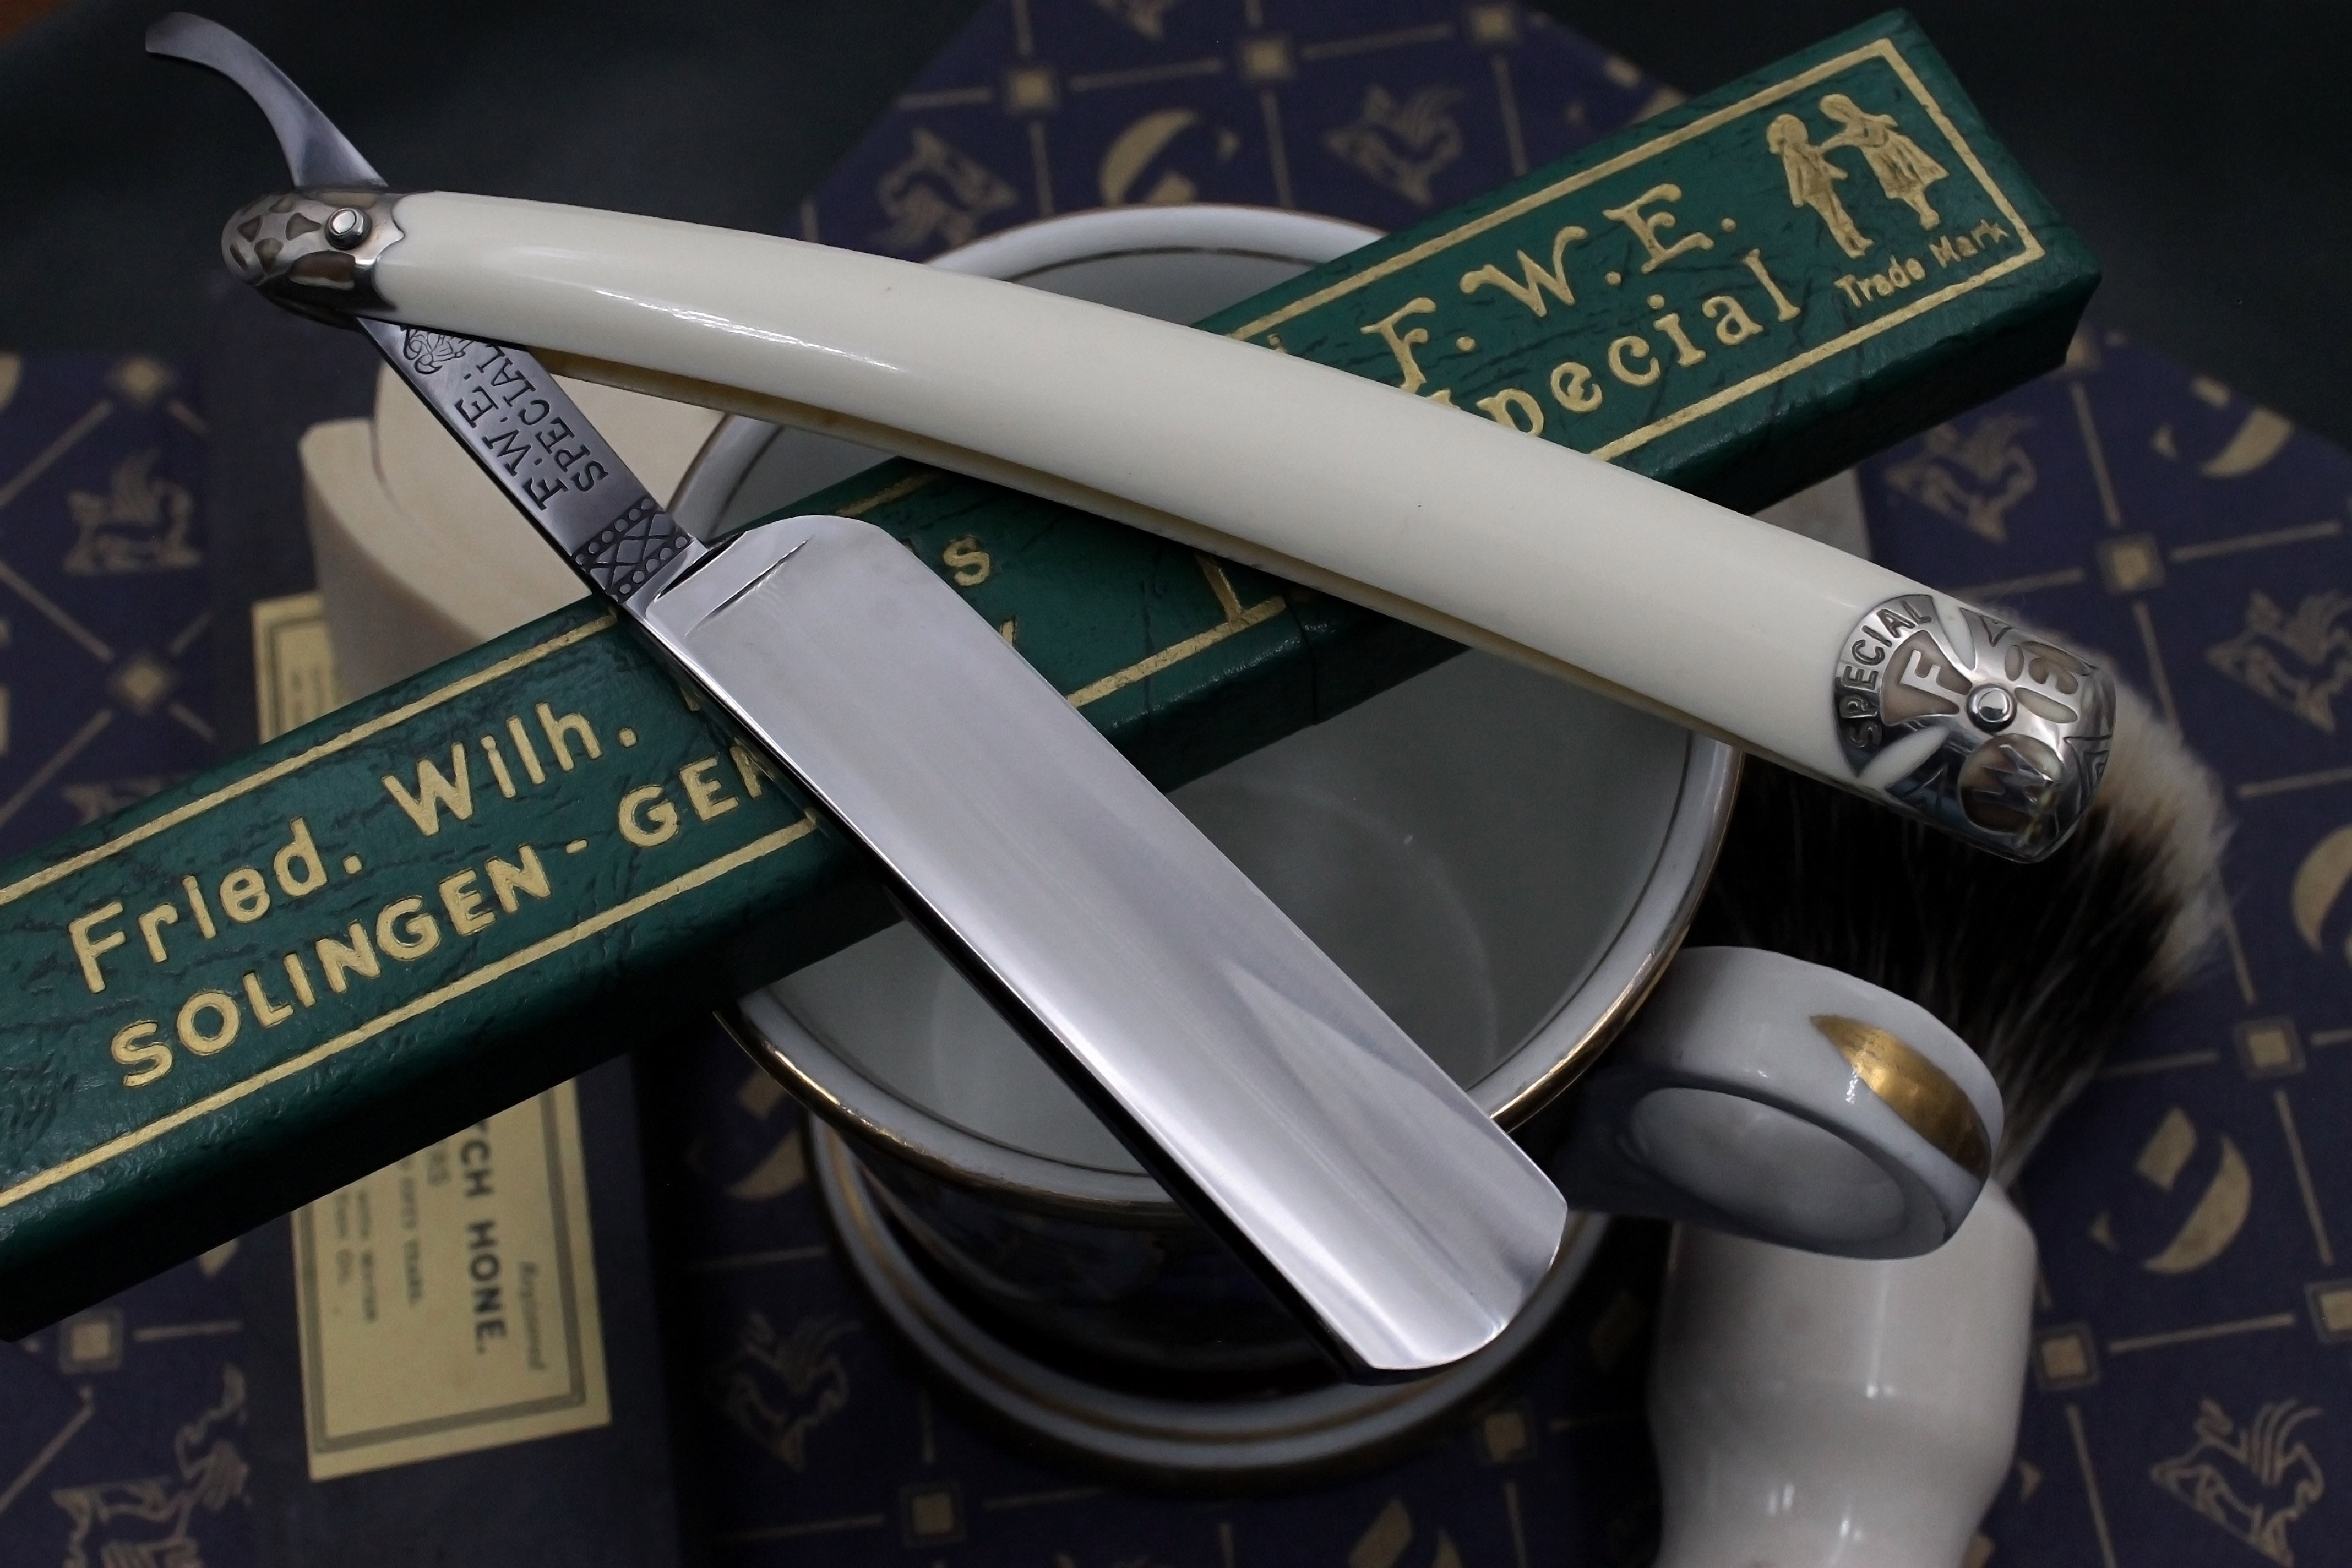 F.W. Engels "FWE Special" - 13/16 Full Hollow Blade - Near Mint Restored Vintage Solingen Straight Razor - Shave Ready